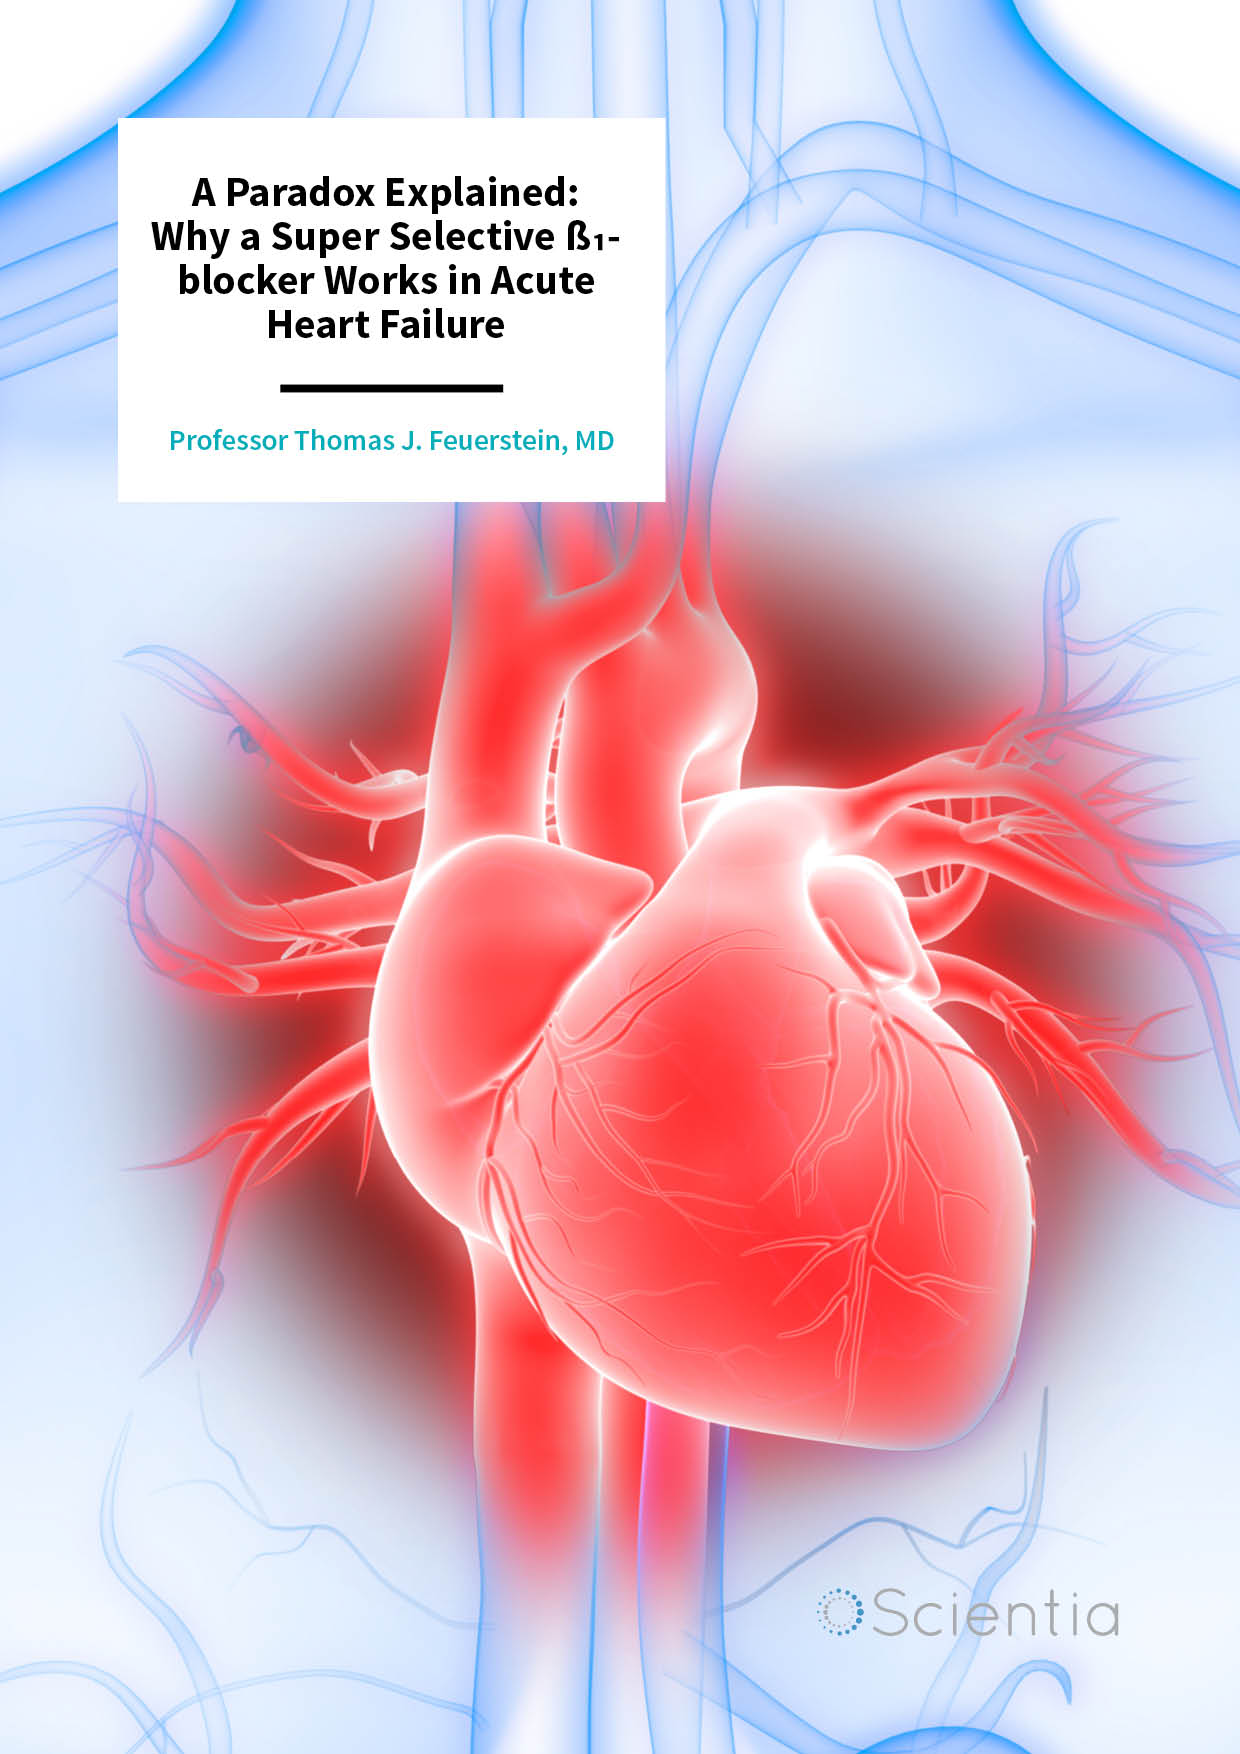 Professor Thomas Feuerstein | A Paradox Explained: Why a Super Selective β1-blocker Works in Acute Heart Failure